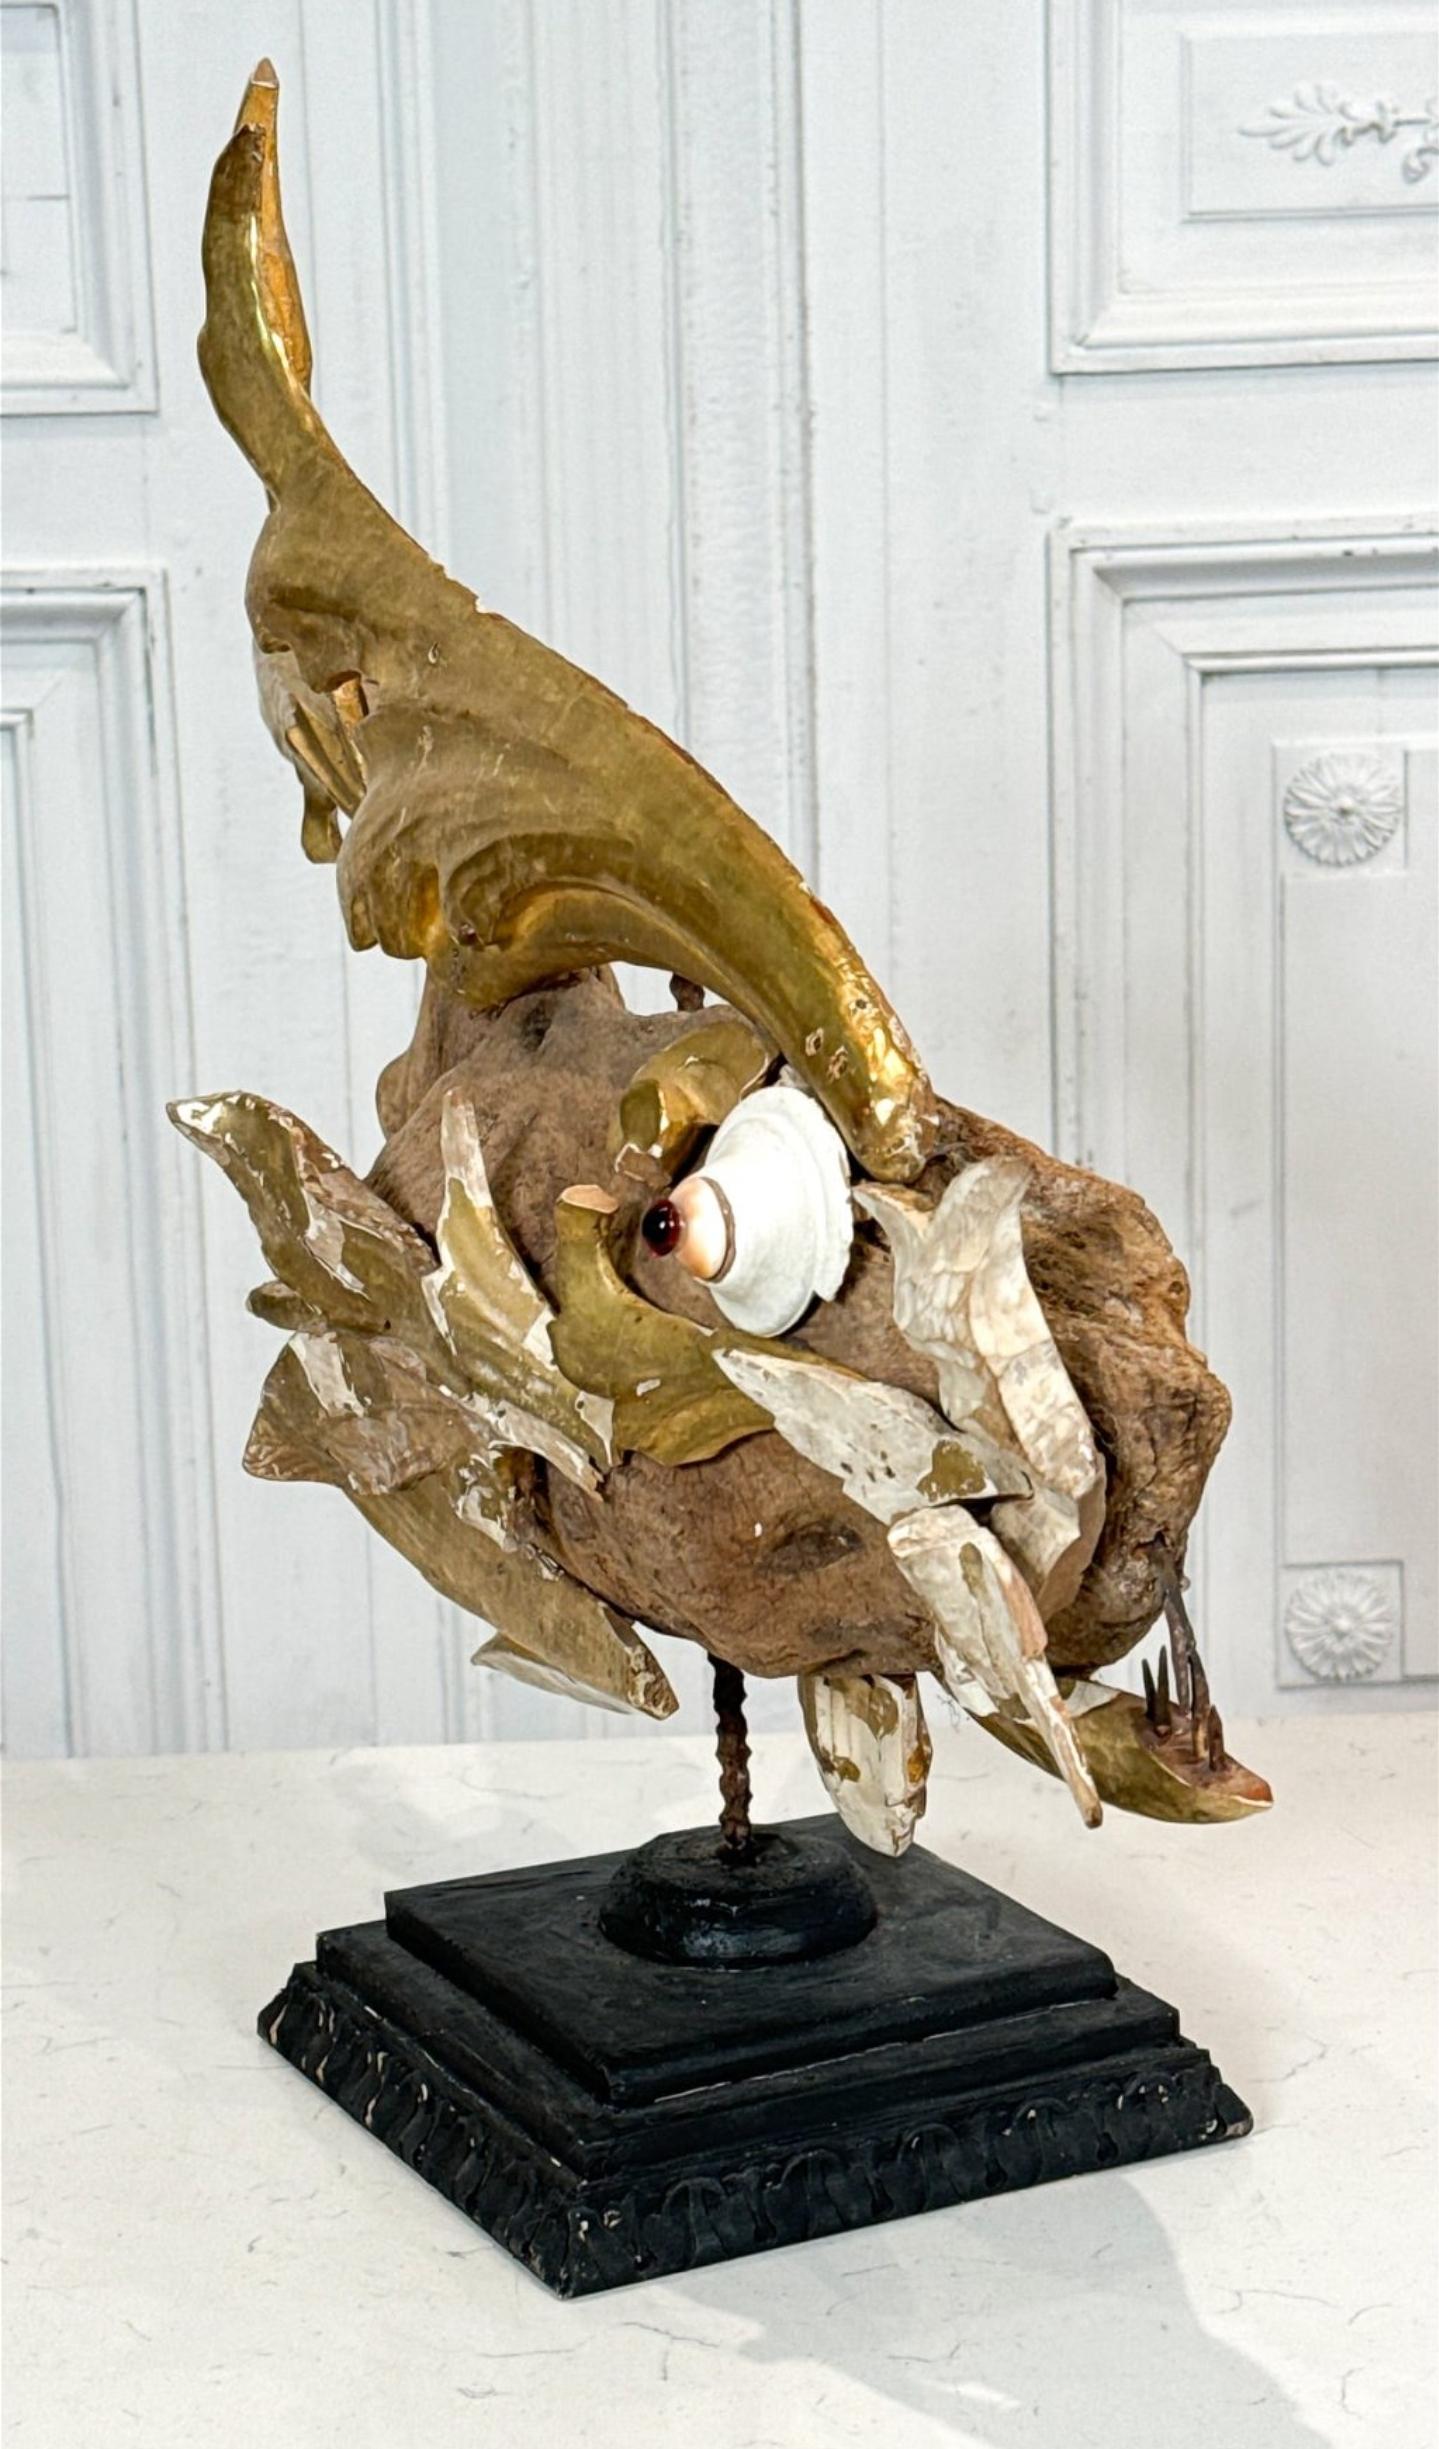 Shell Italian Folk Art Fish Sculpture from 18th/19th Century Fragments Found Objects For Sale